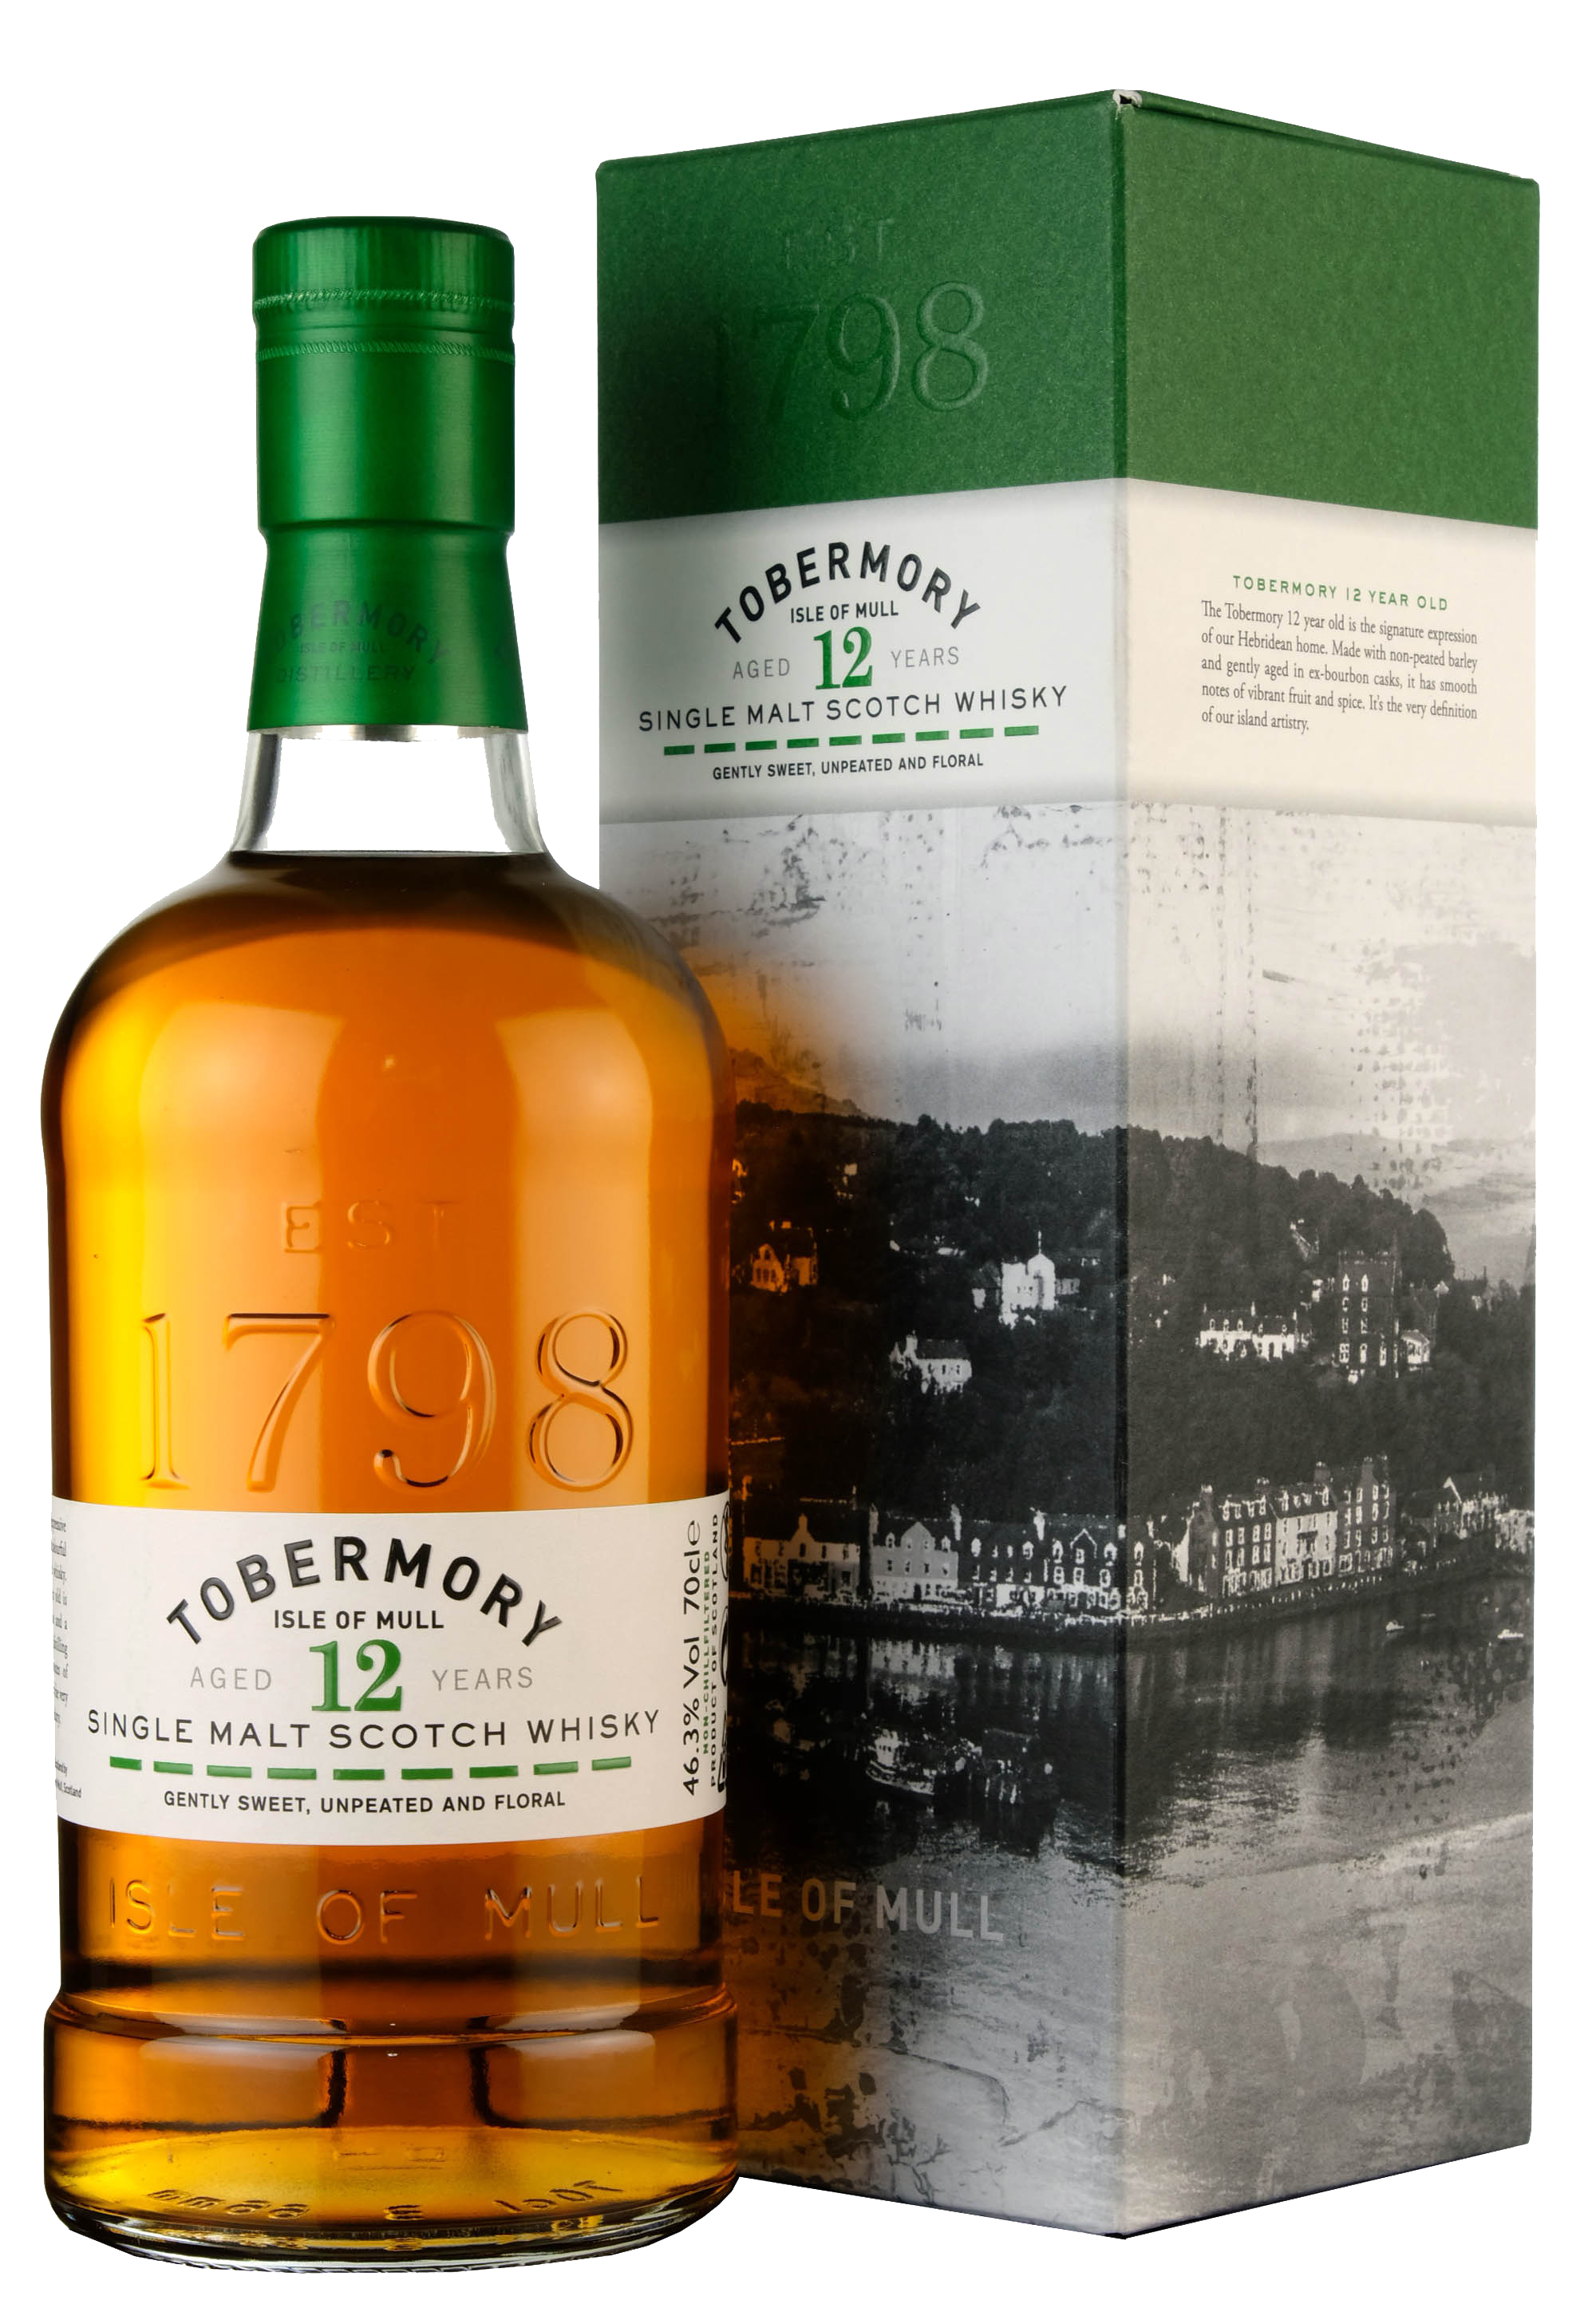 Tobermory 12 Year Old